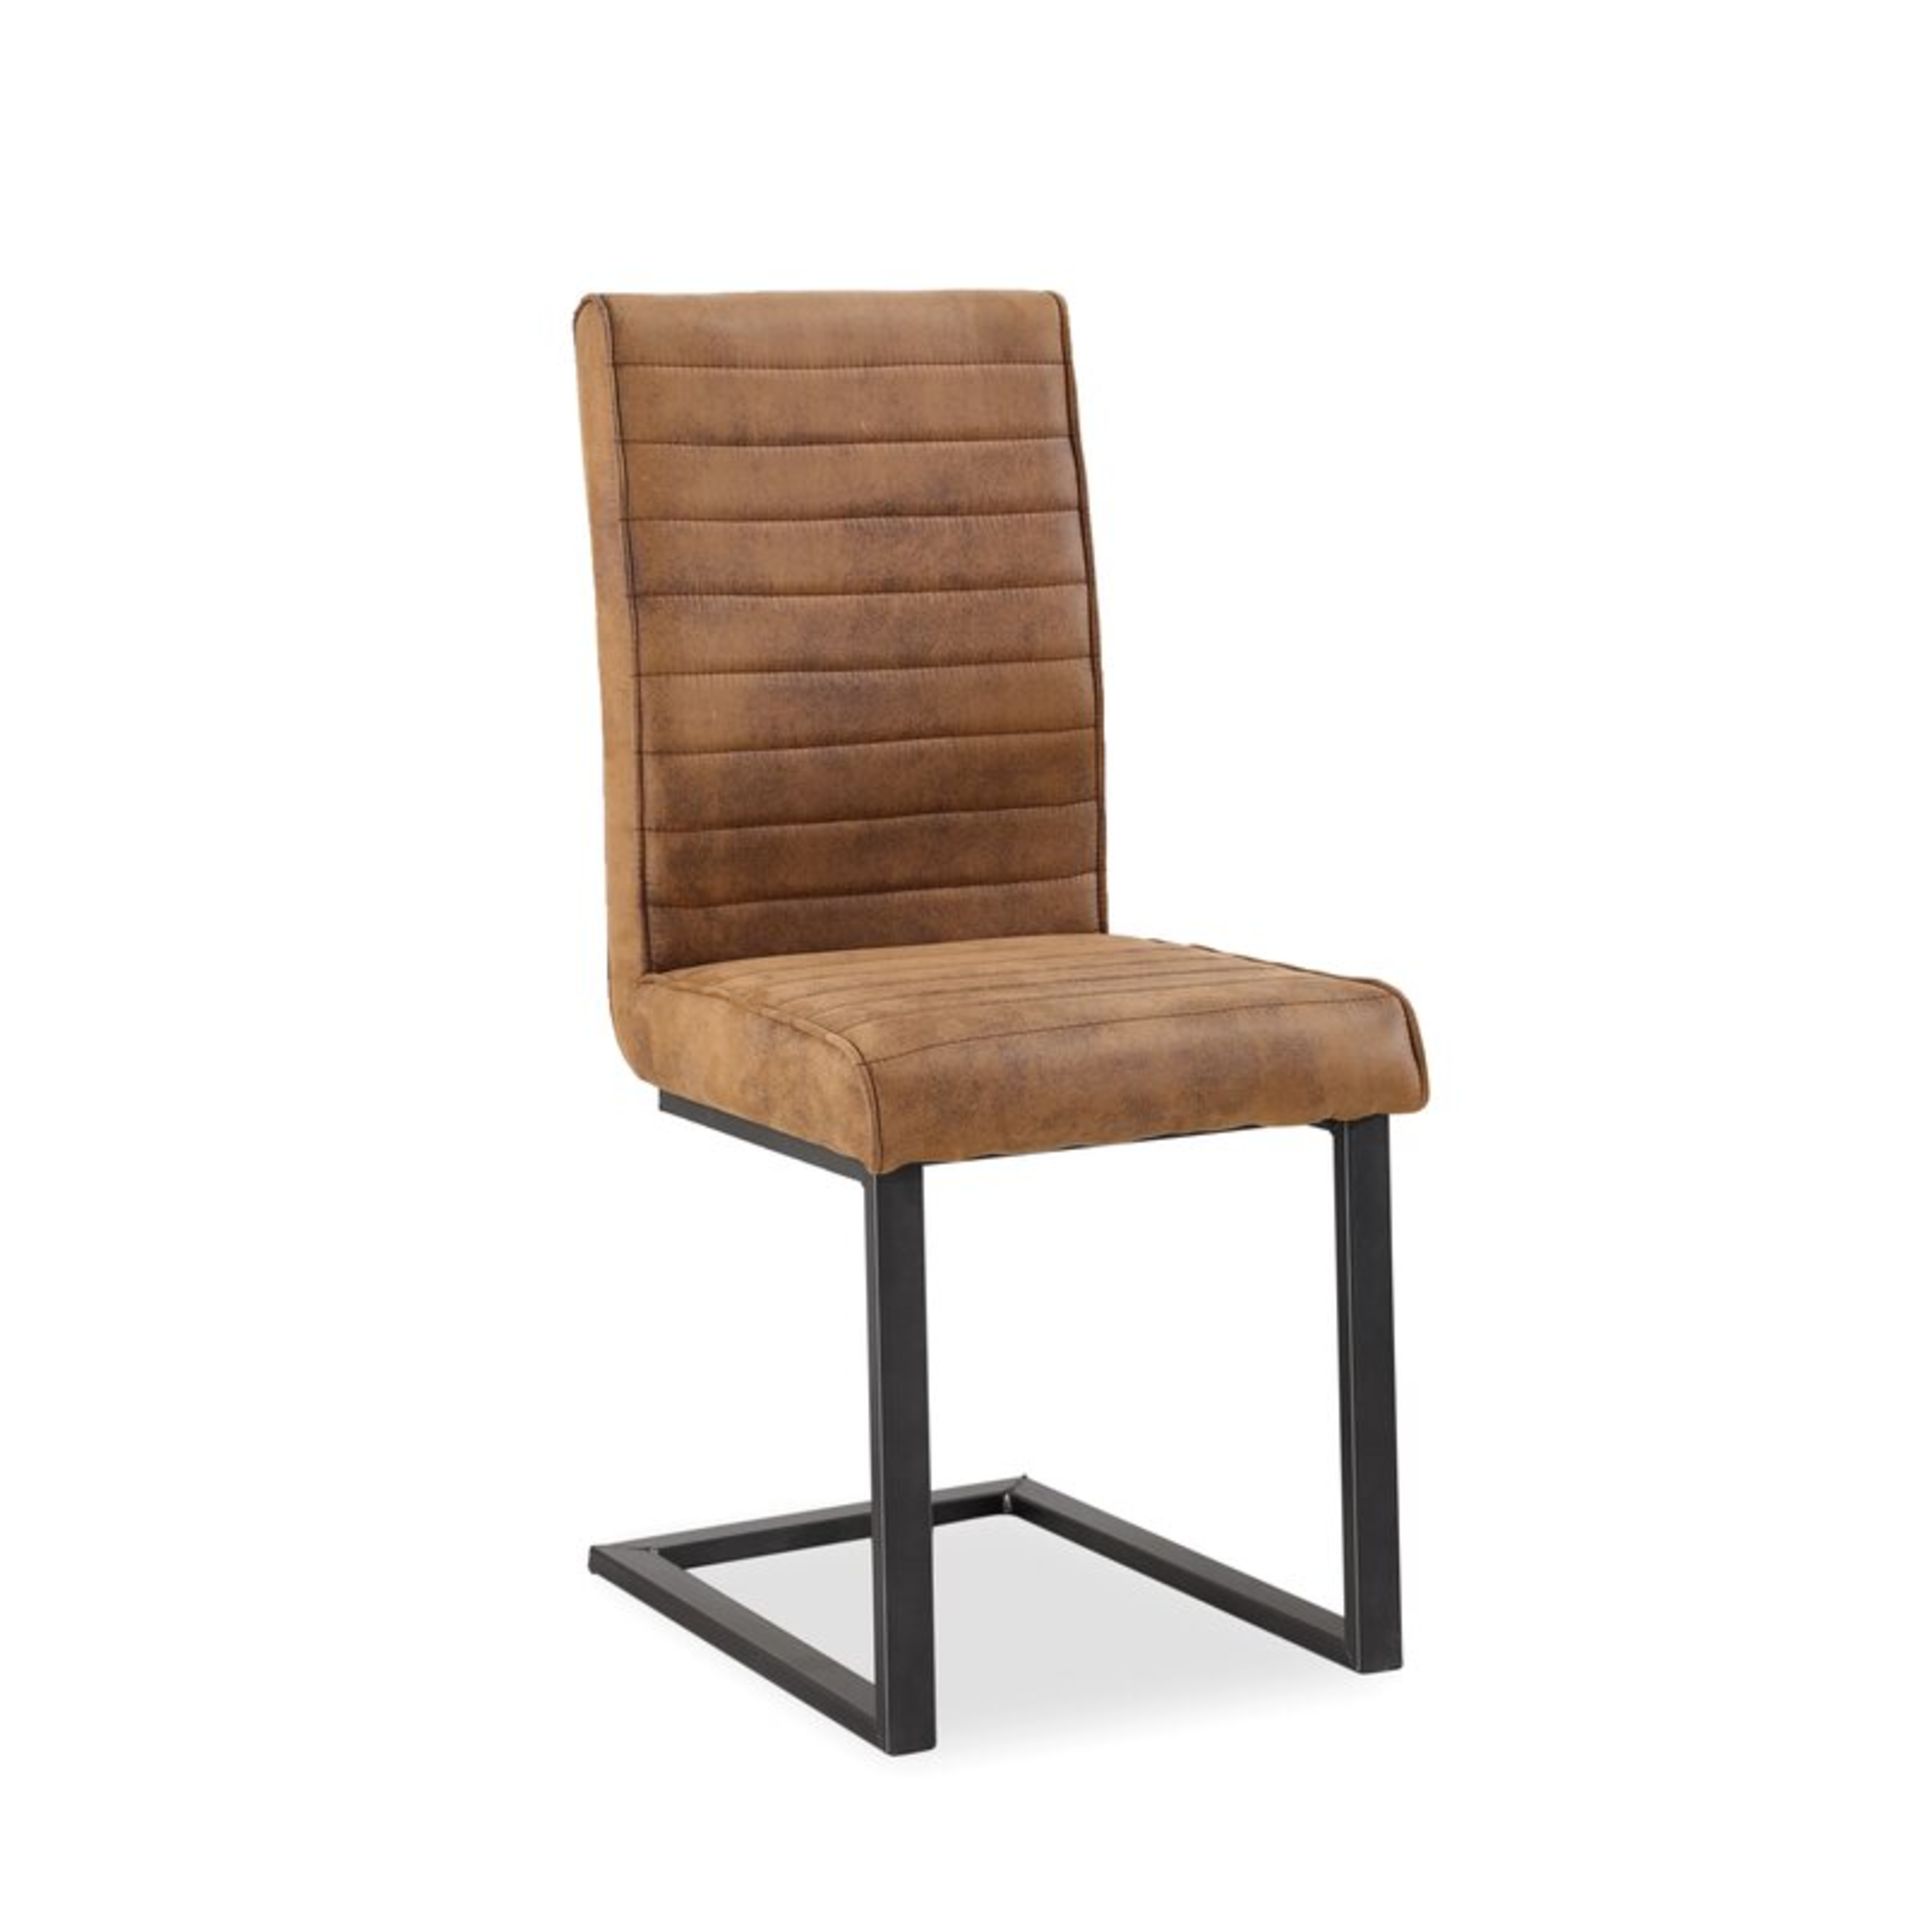 Zac Upholstered Cantilever Chair RRP £195.99